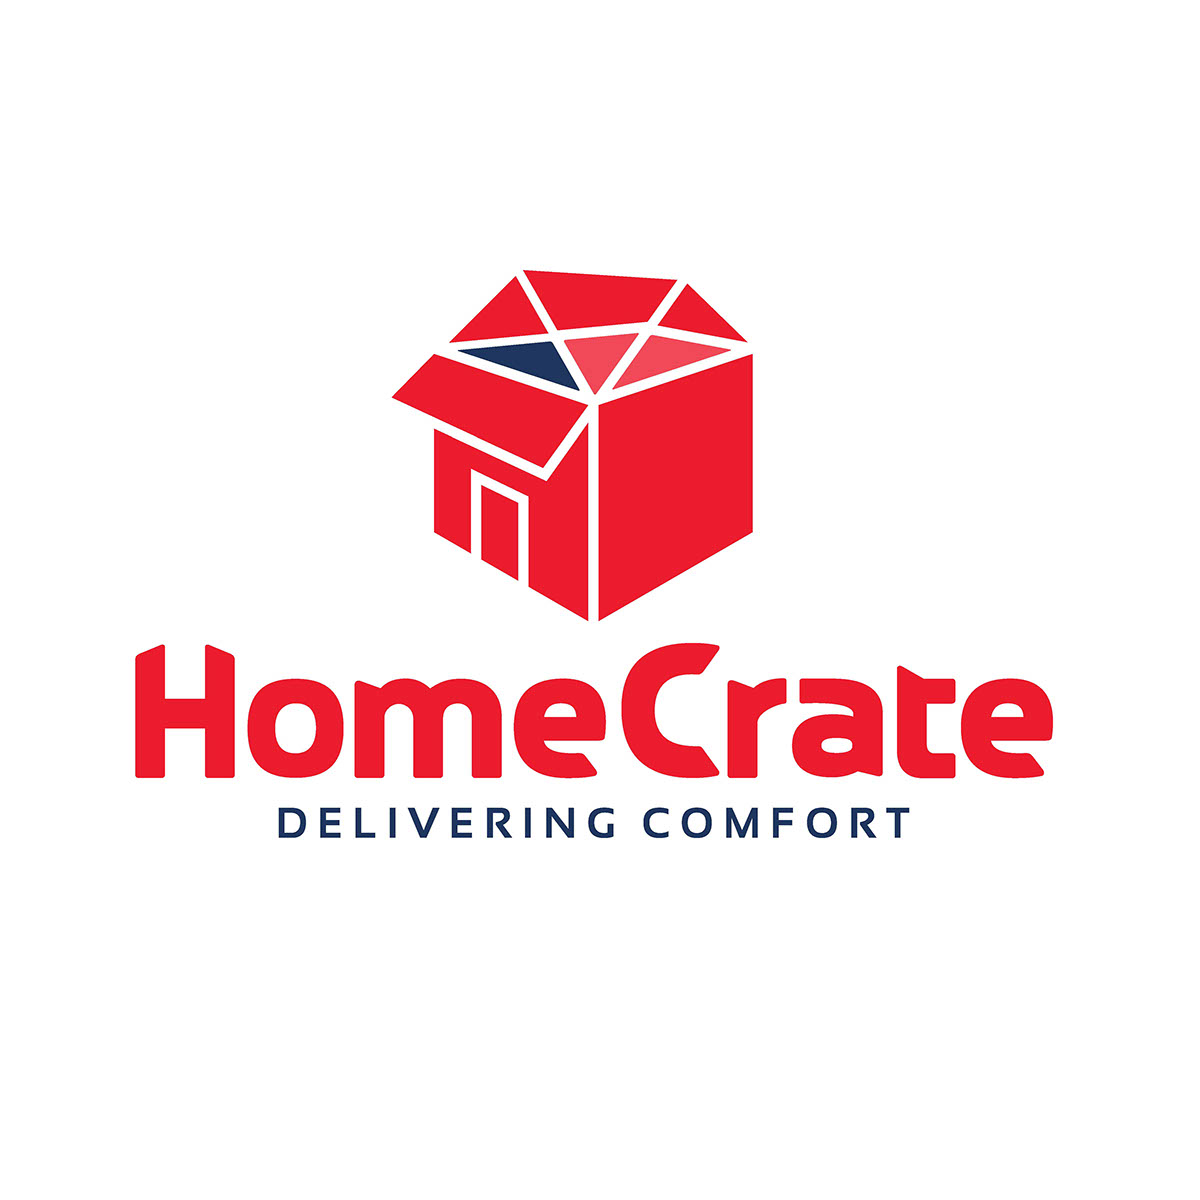 homecrate home goods Amazon delivery home logo Brand Development red house box